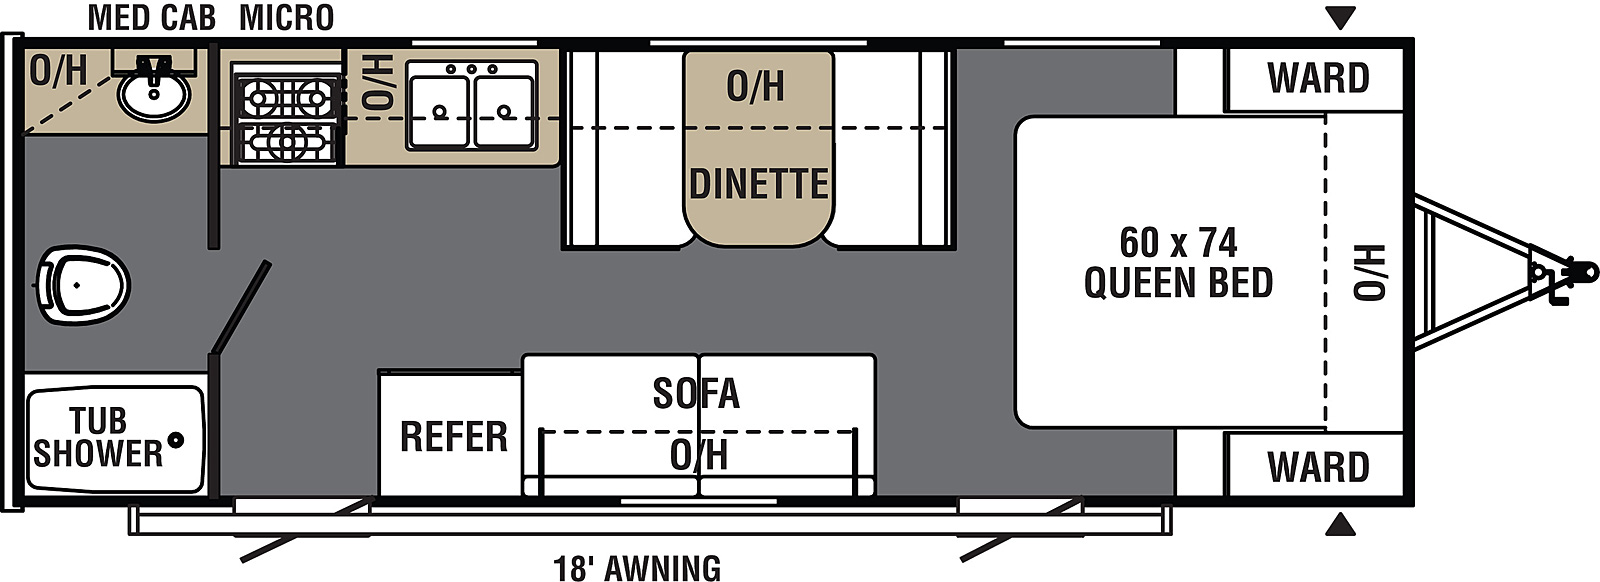 Viking Ultra-Lite 21FQ floorplan. The 21FQ has no slide outs and two plus entry doors.